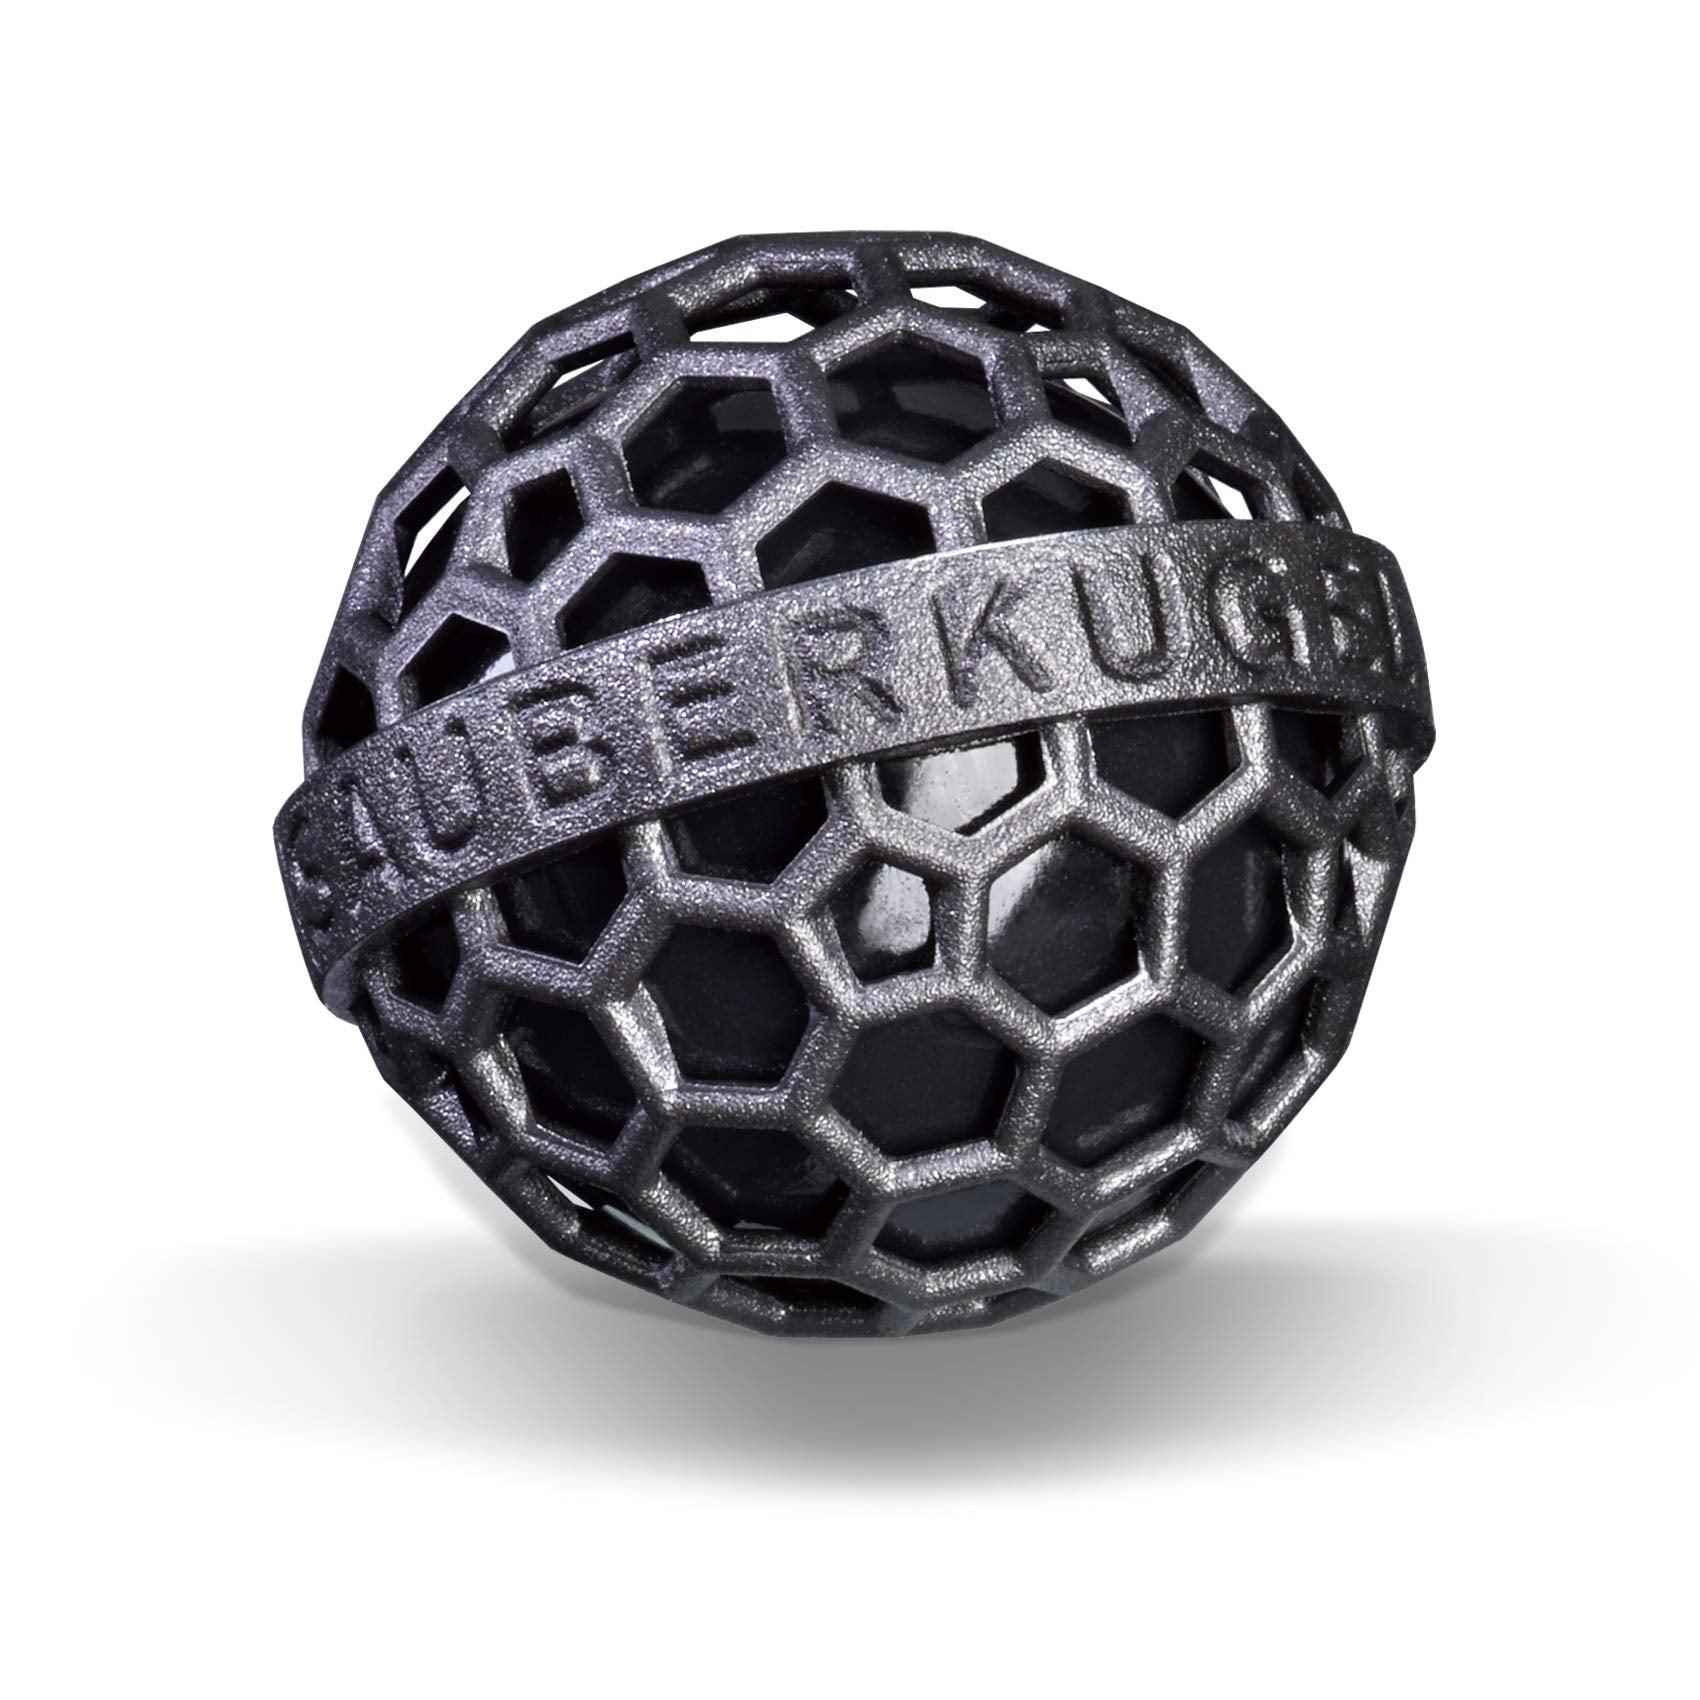 Sauberkugel - The Clean Ball - The clever way of cleaning bags, backpacks and school bags